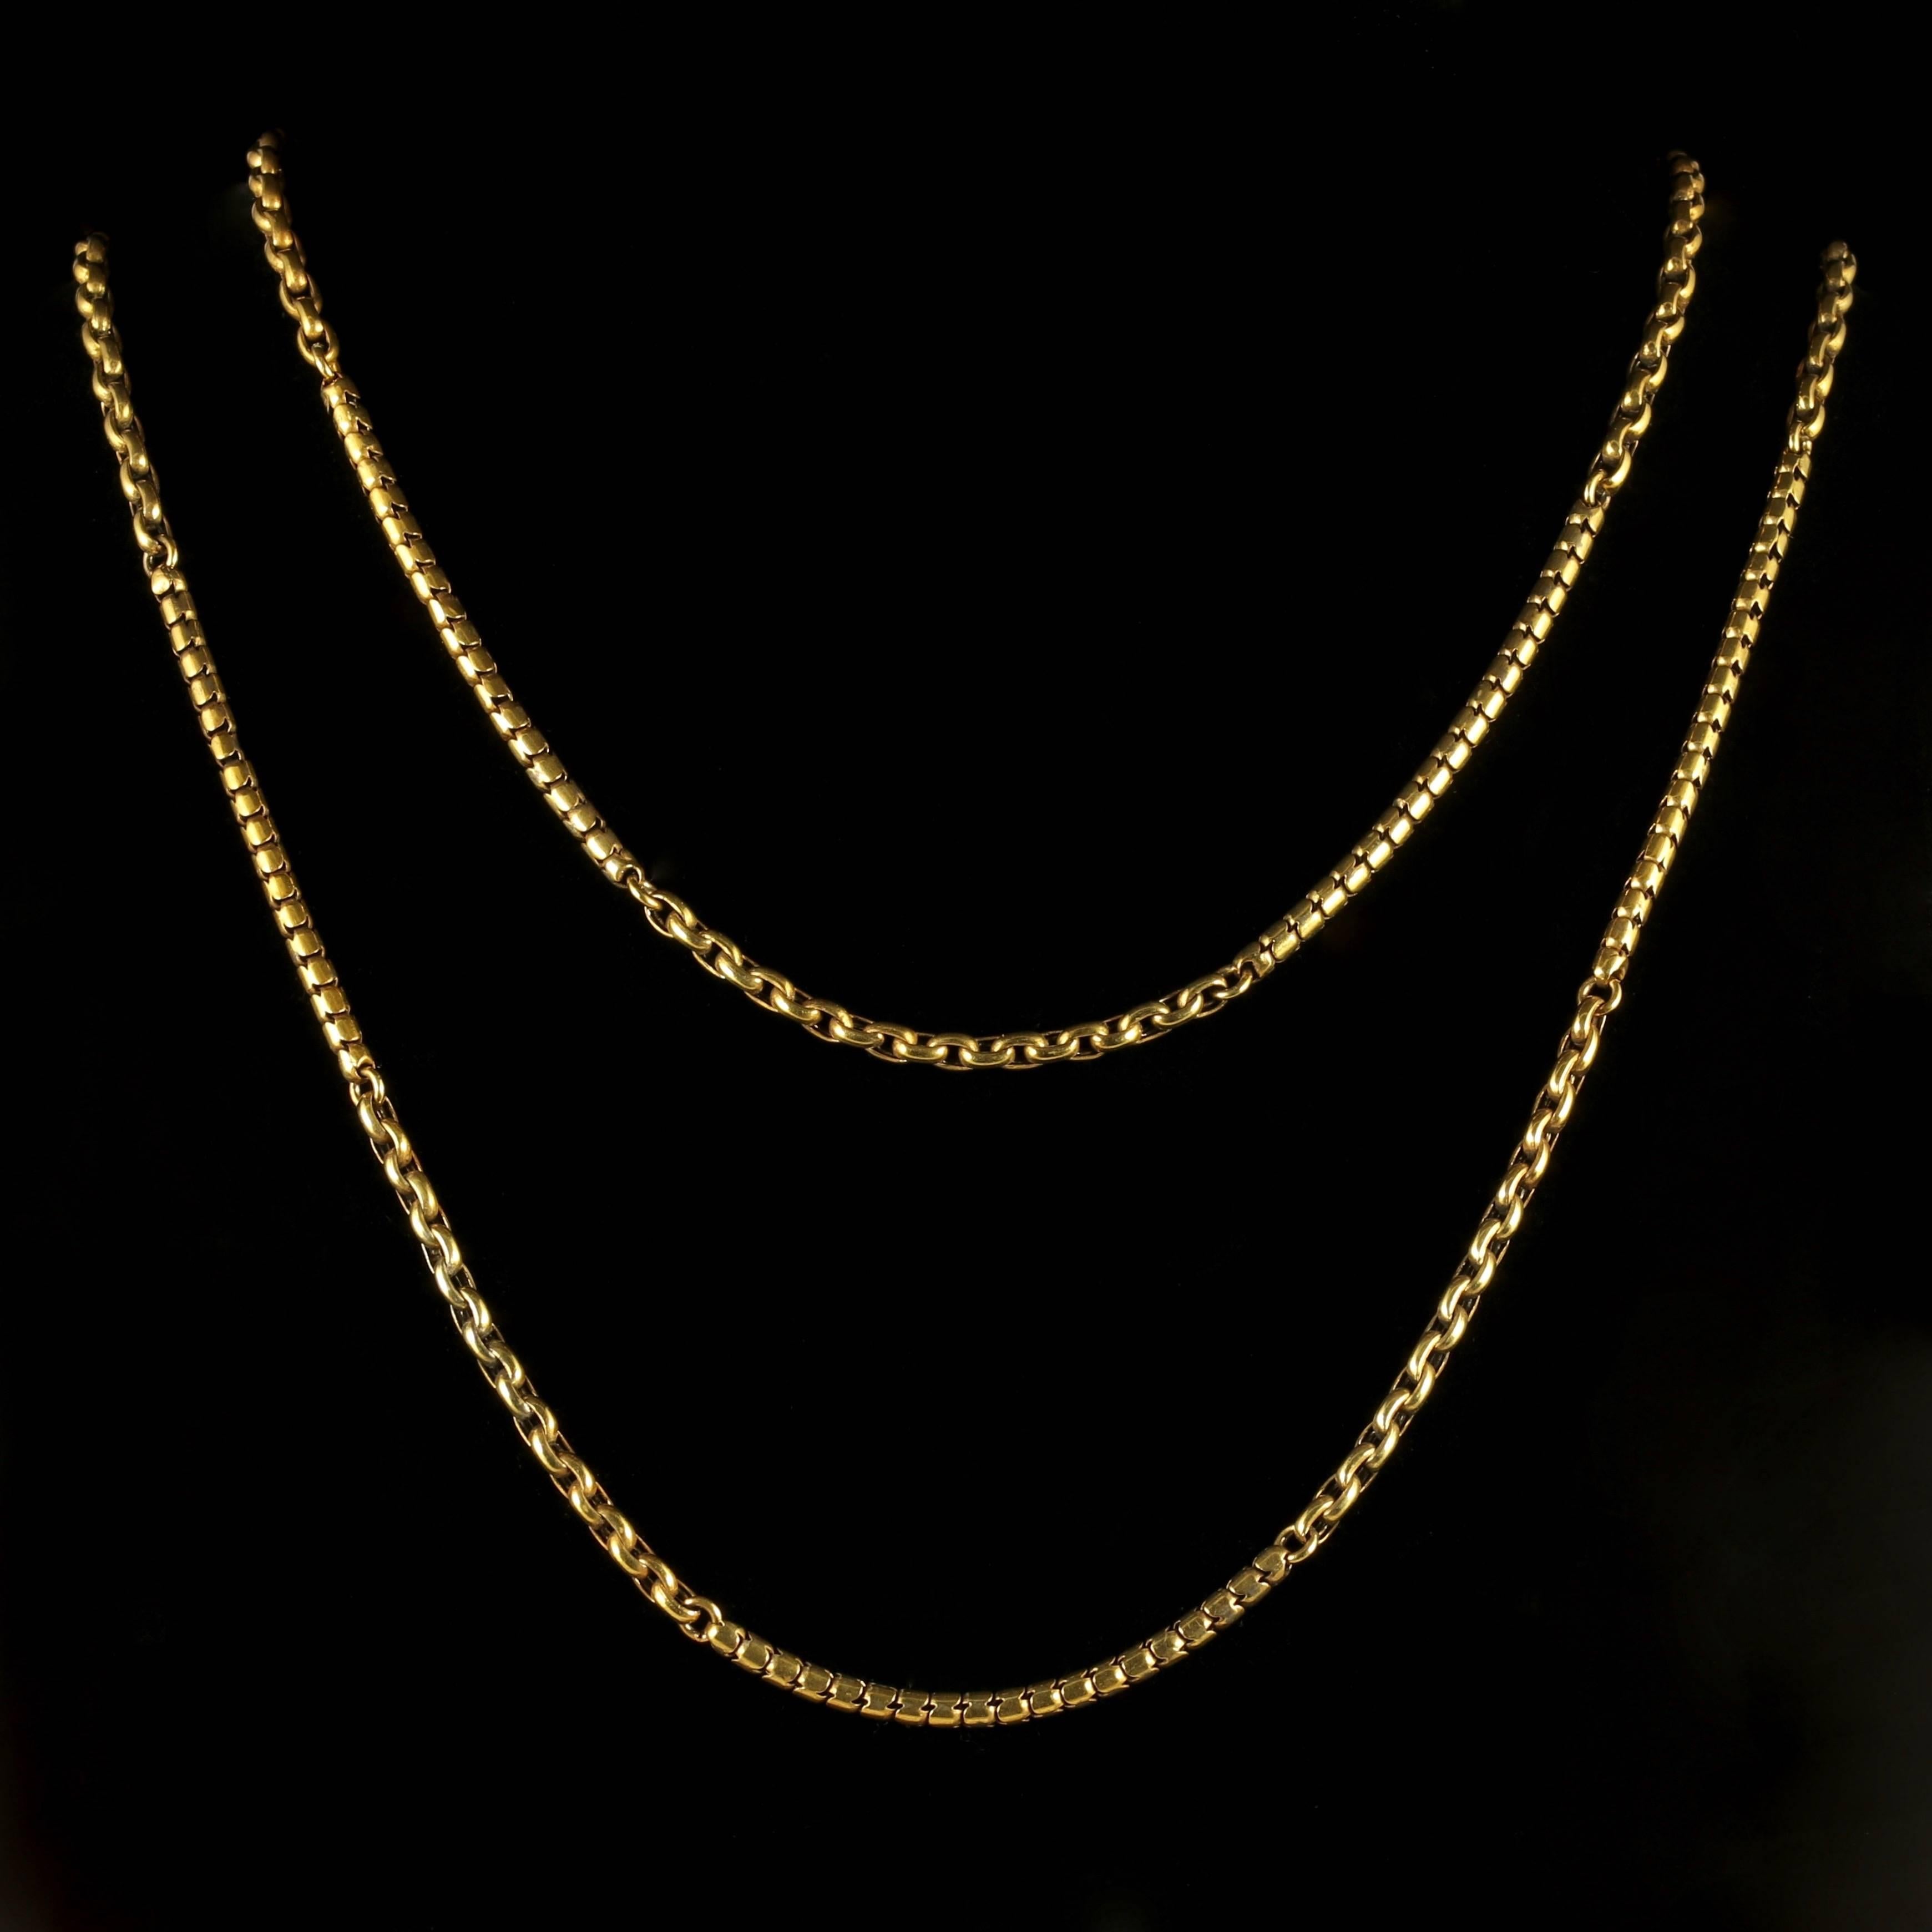 This spectacular long guard chain is all original set with different original sections which make it all the more interesting.

A genuine Victorian piece, Circa 1900.

The fabulous chain is 18ct Yellow Gold on Silver and has a nice smooth finish to